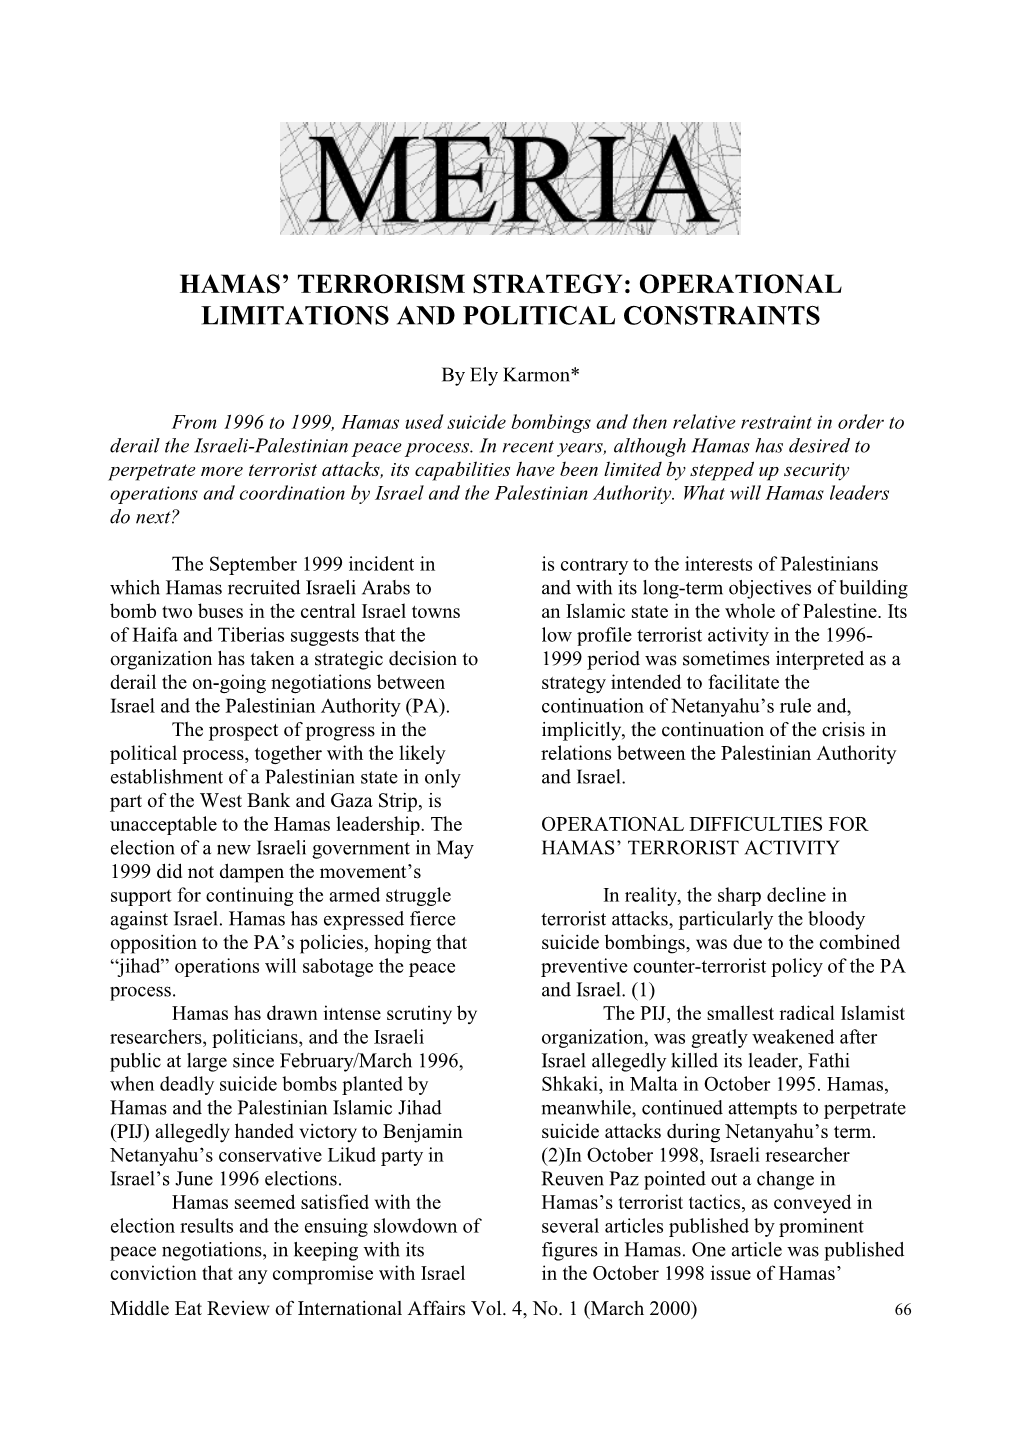 Hamas' Terrorism Strategy: Operational Limitations and Political Constraints